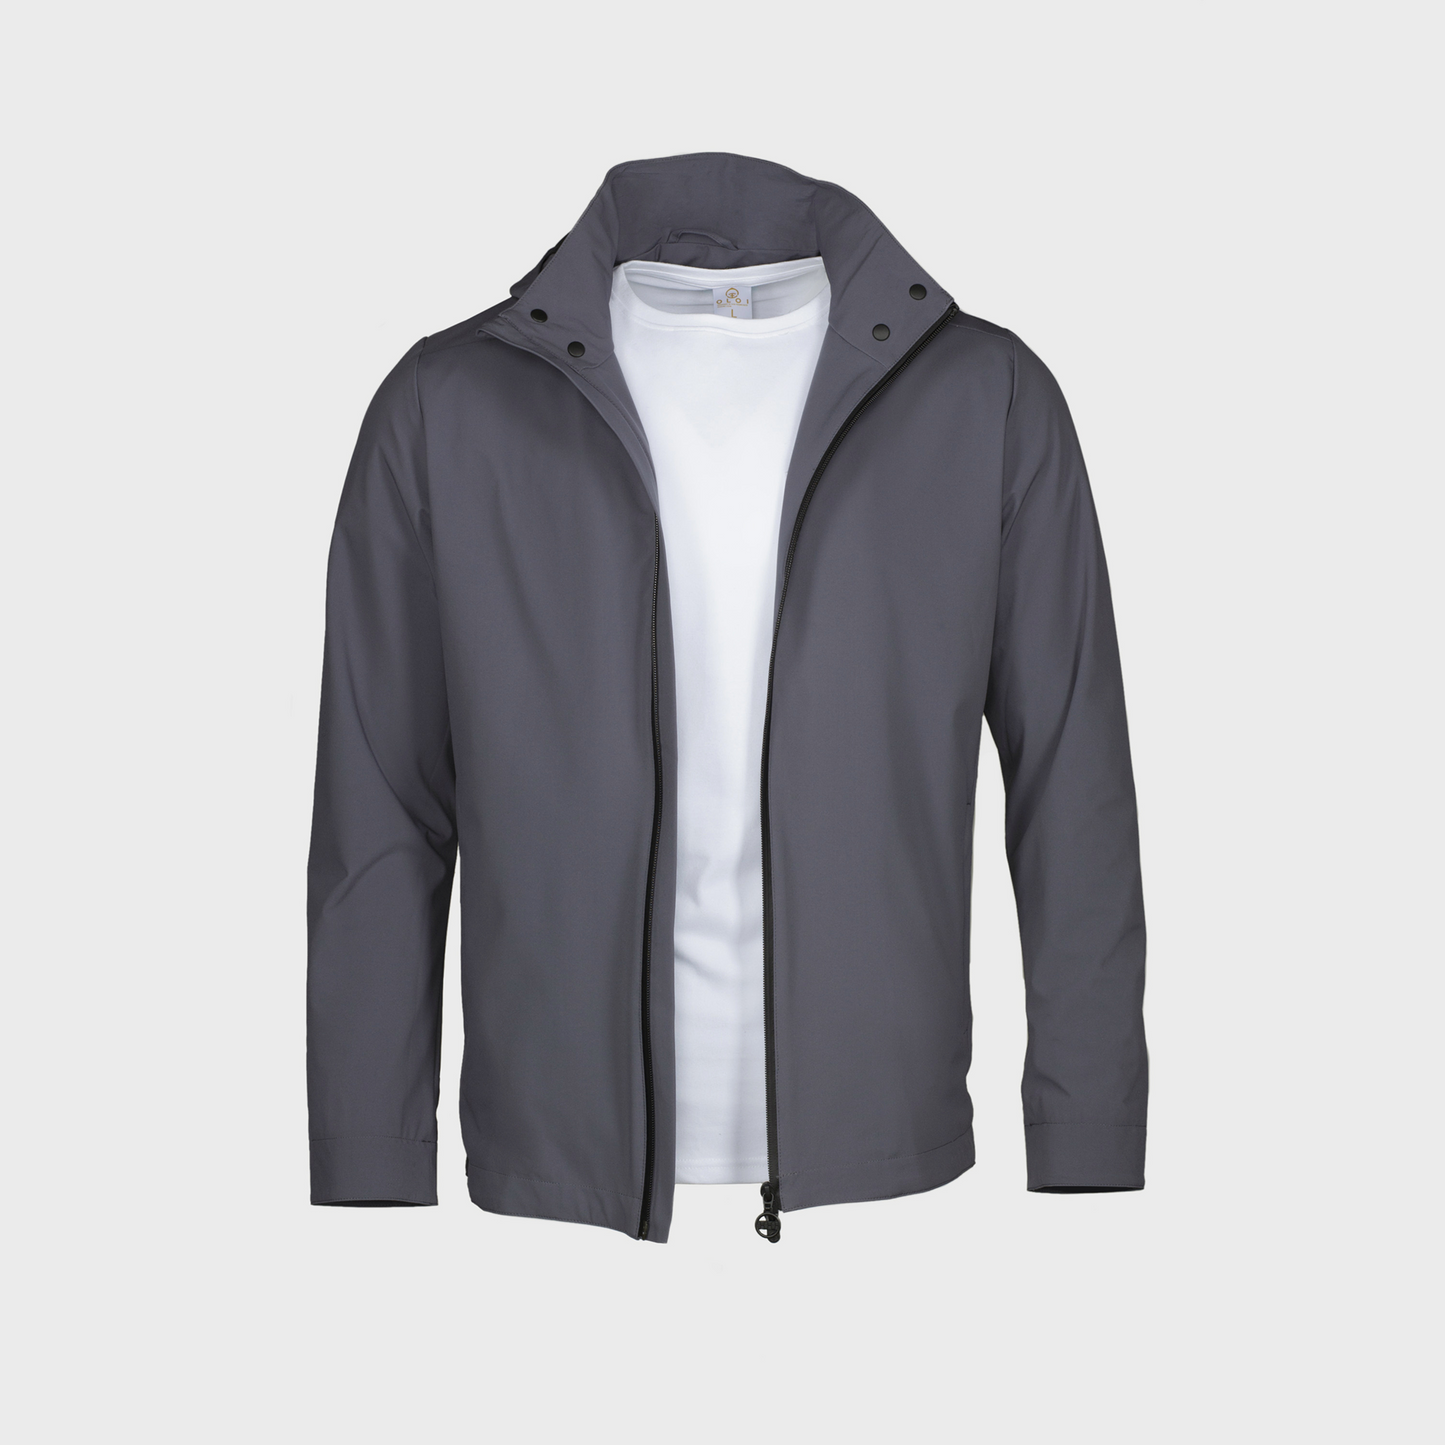 All Weather Defense Jacket - Gray